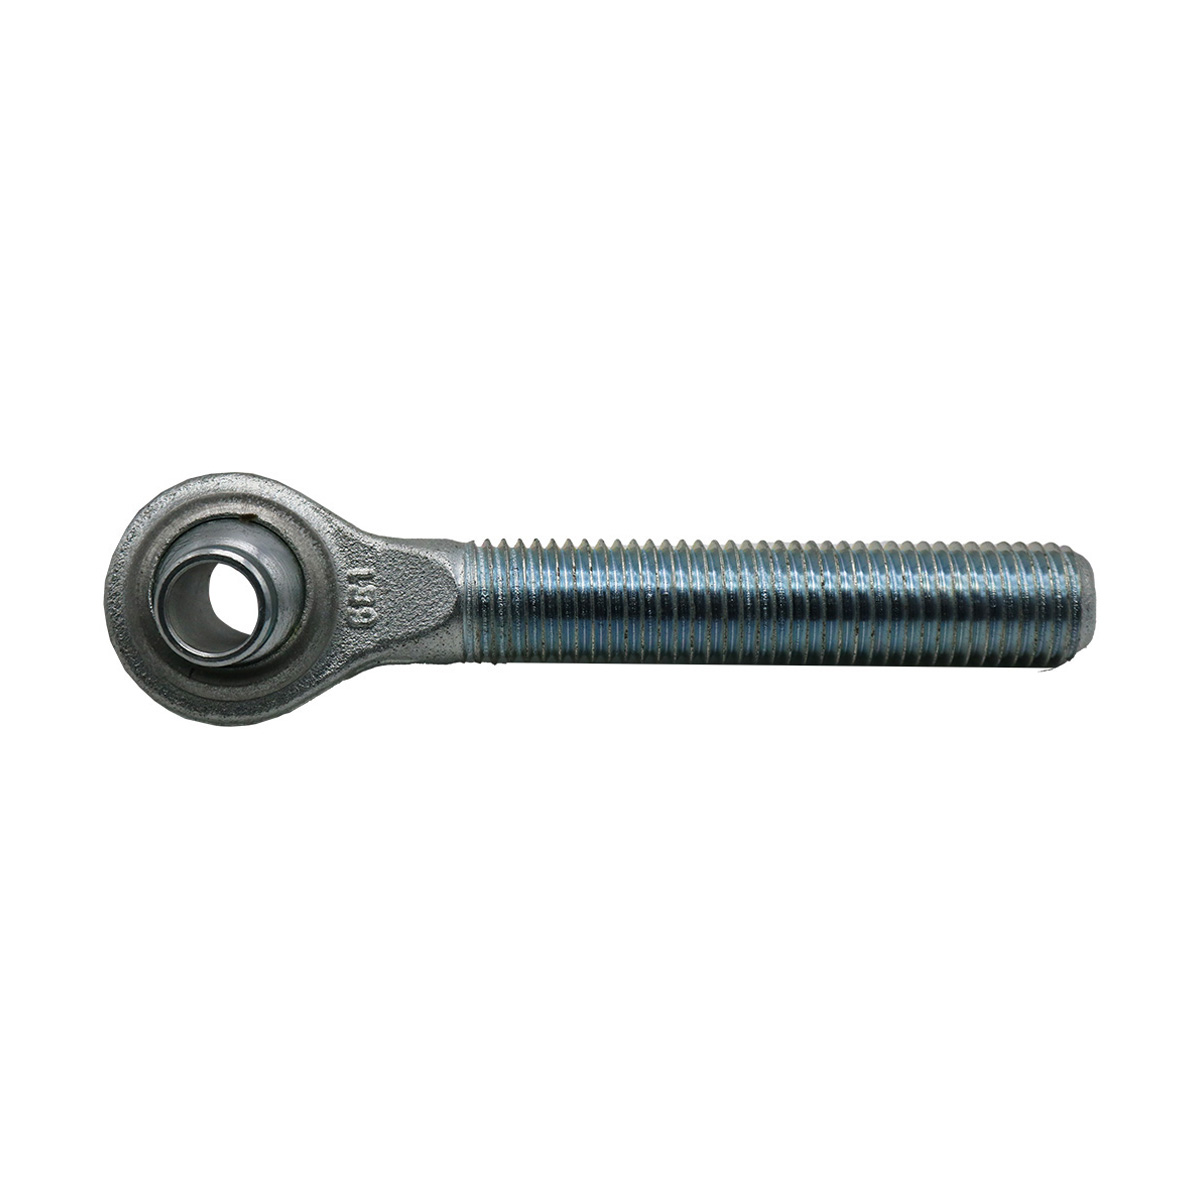 Category 1 Right Hand Threaded Toplink Repair End